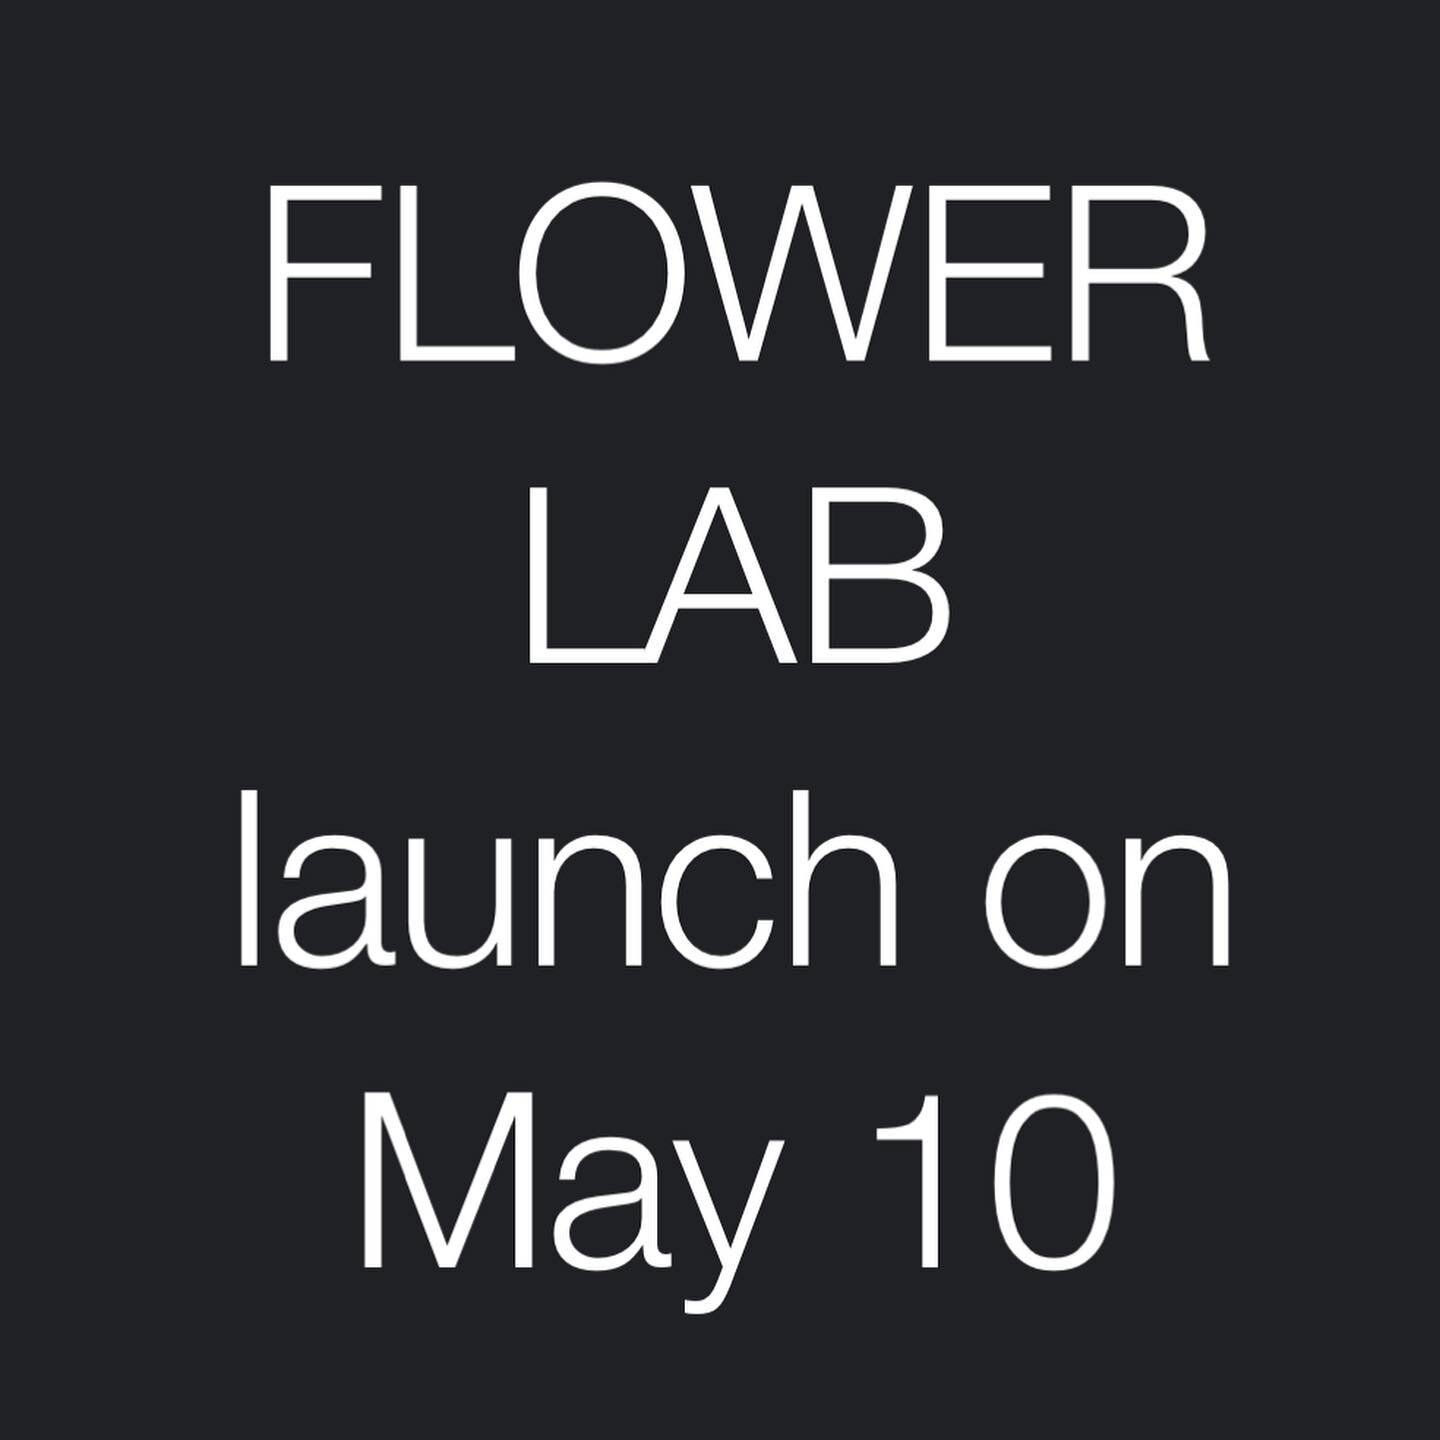 Subscribe FLOWER LAB exclusive membership from now till May 10. 

Celebrating the launch with FREE-FLOW pick-your-own-flower on May 10 at 4-7pm at our Sheung Wan studio.

Limited 222 membership only. Subscribe now via link in bio.